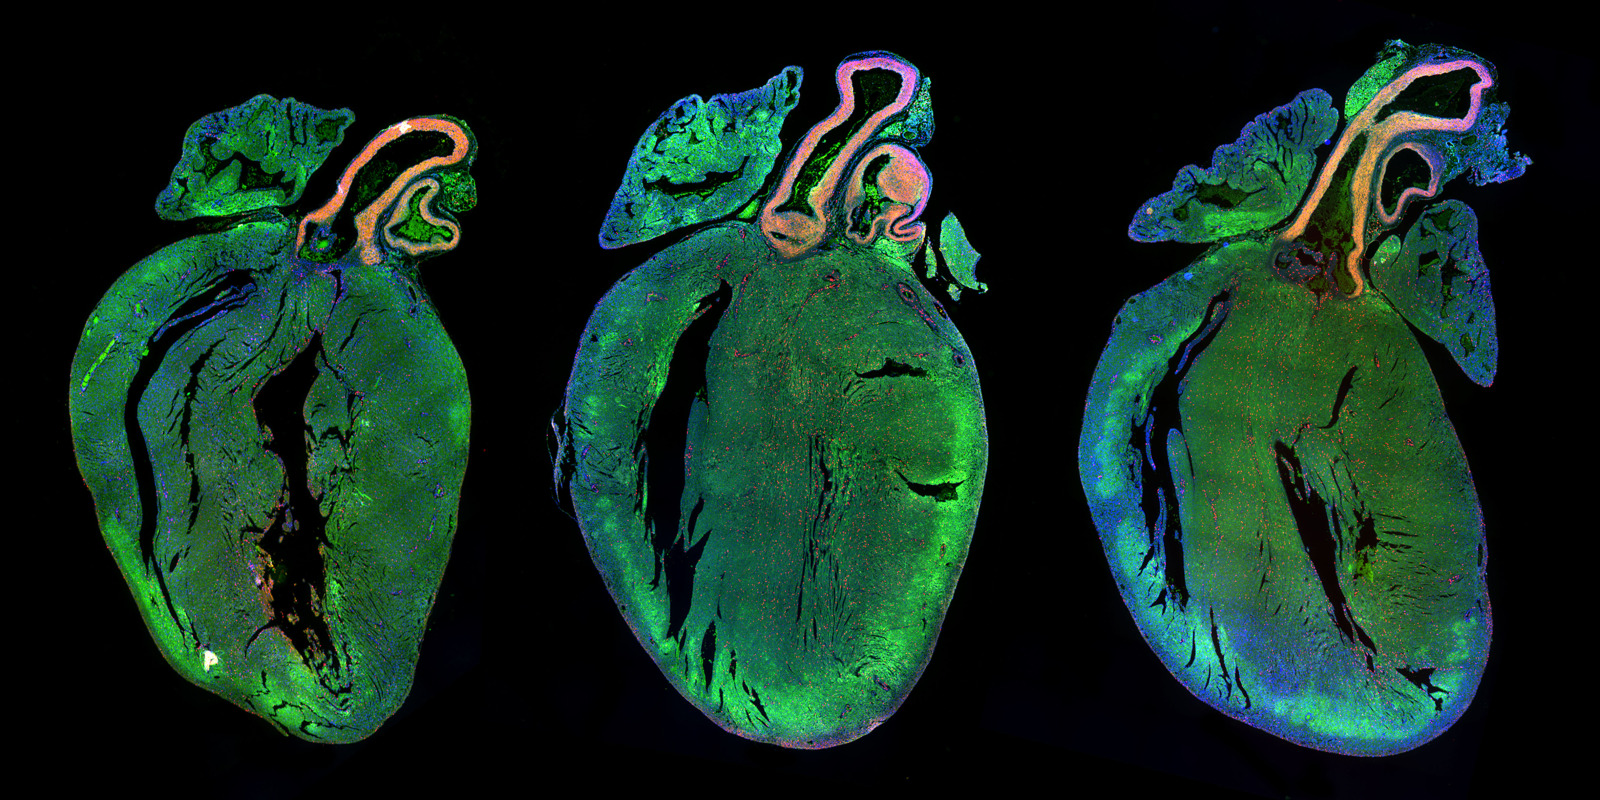 Neonatal rat hearts treated with a control microRNA (left) or two human microRNAs strongly increasing cardiomyocyte proliferation (middle and right).